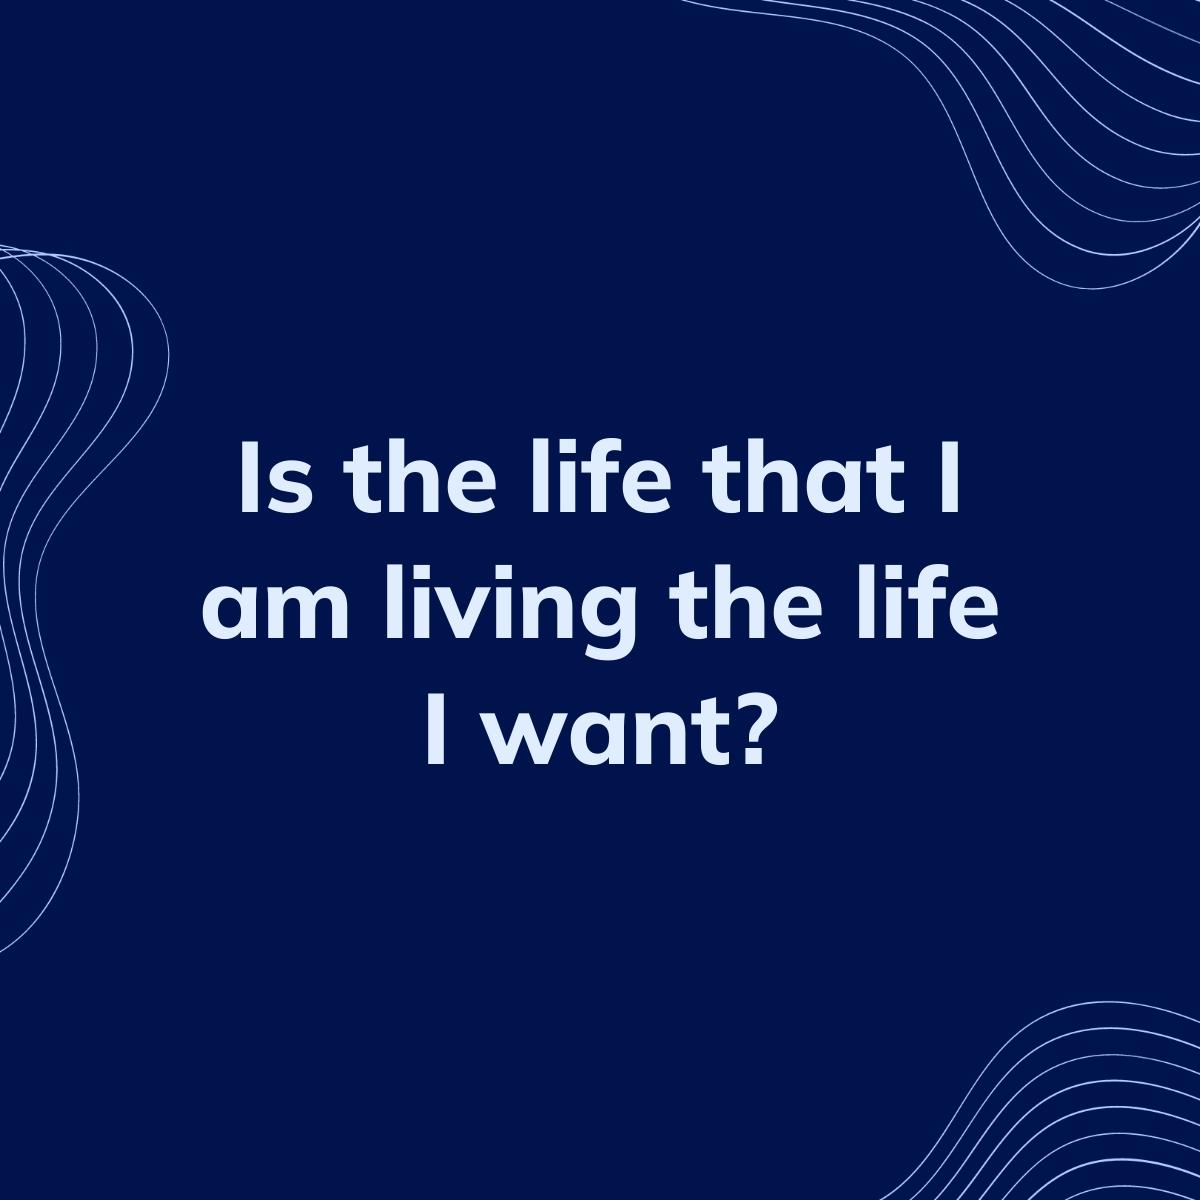 Journal Prompt: Is the life that I am living the life I want?